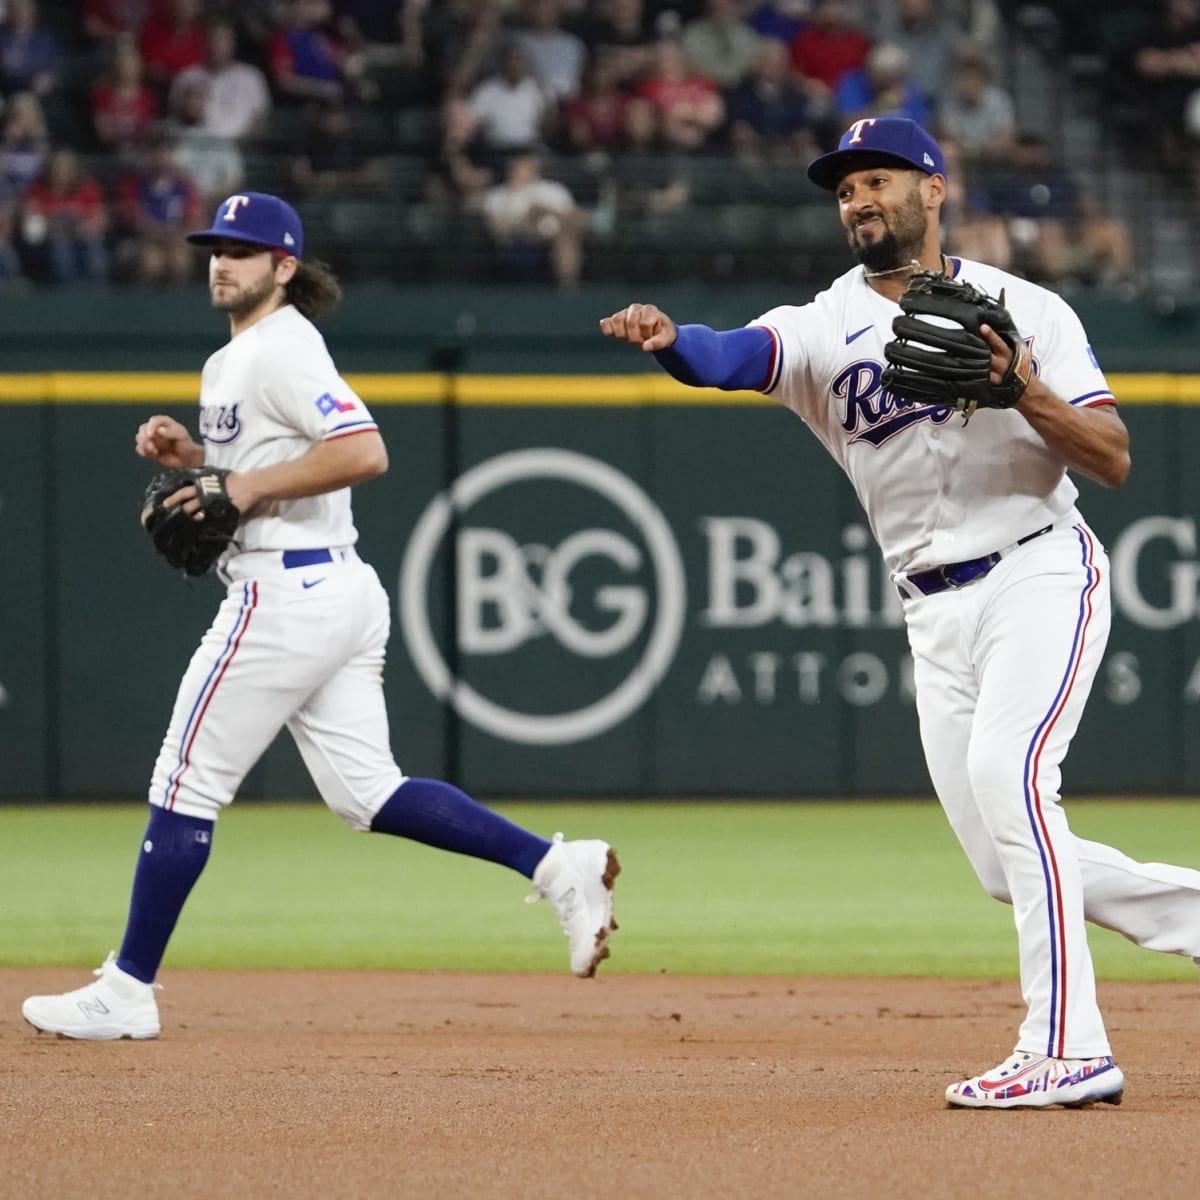 Texas Rangers players talk to media before 2023 MLB All-Star Game